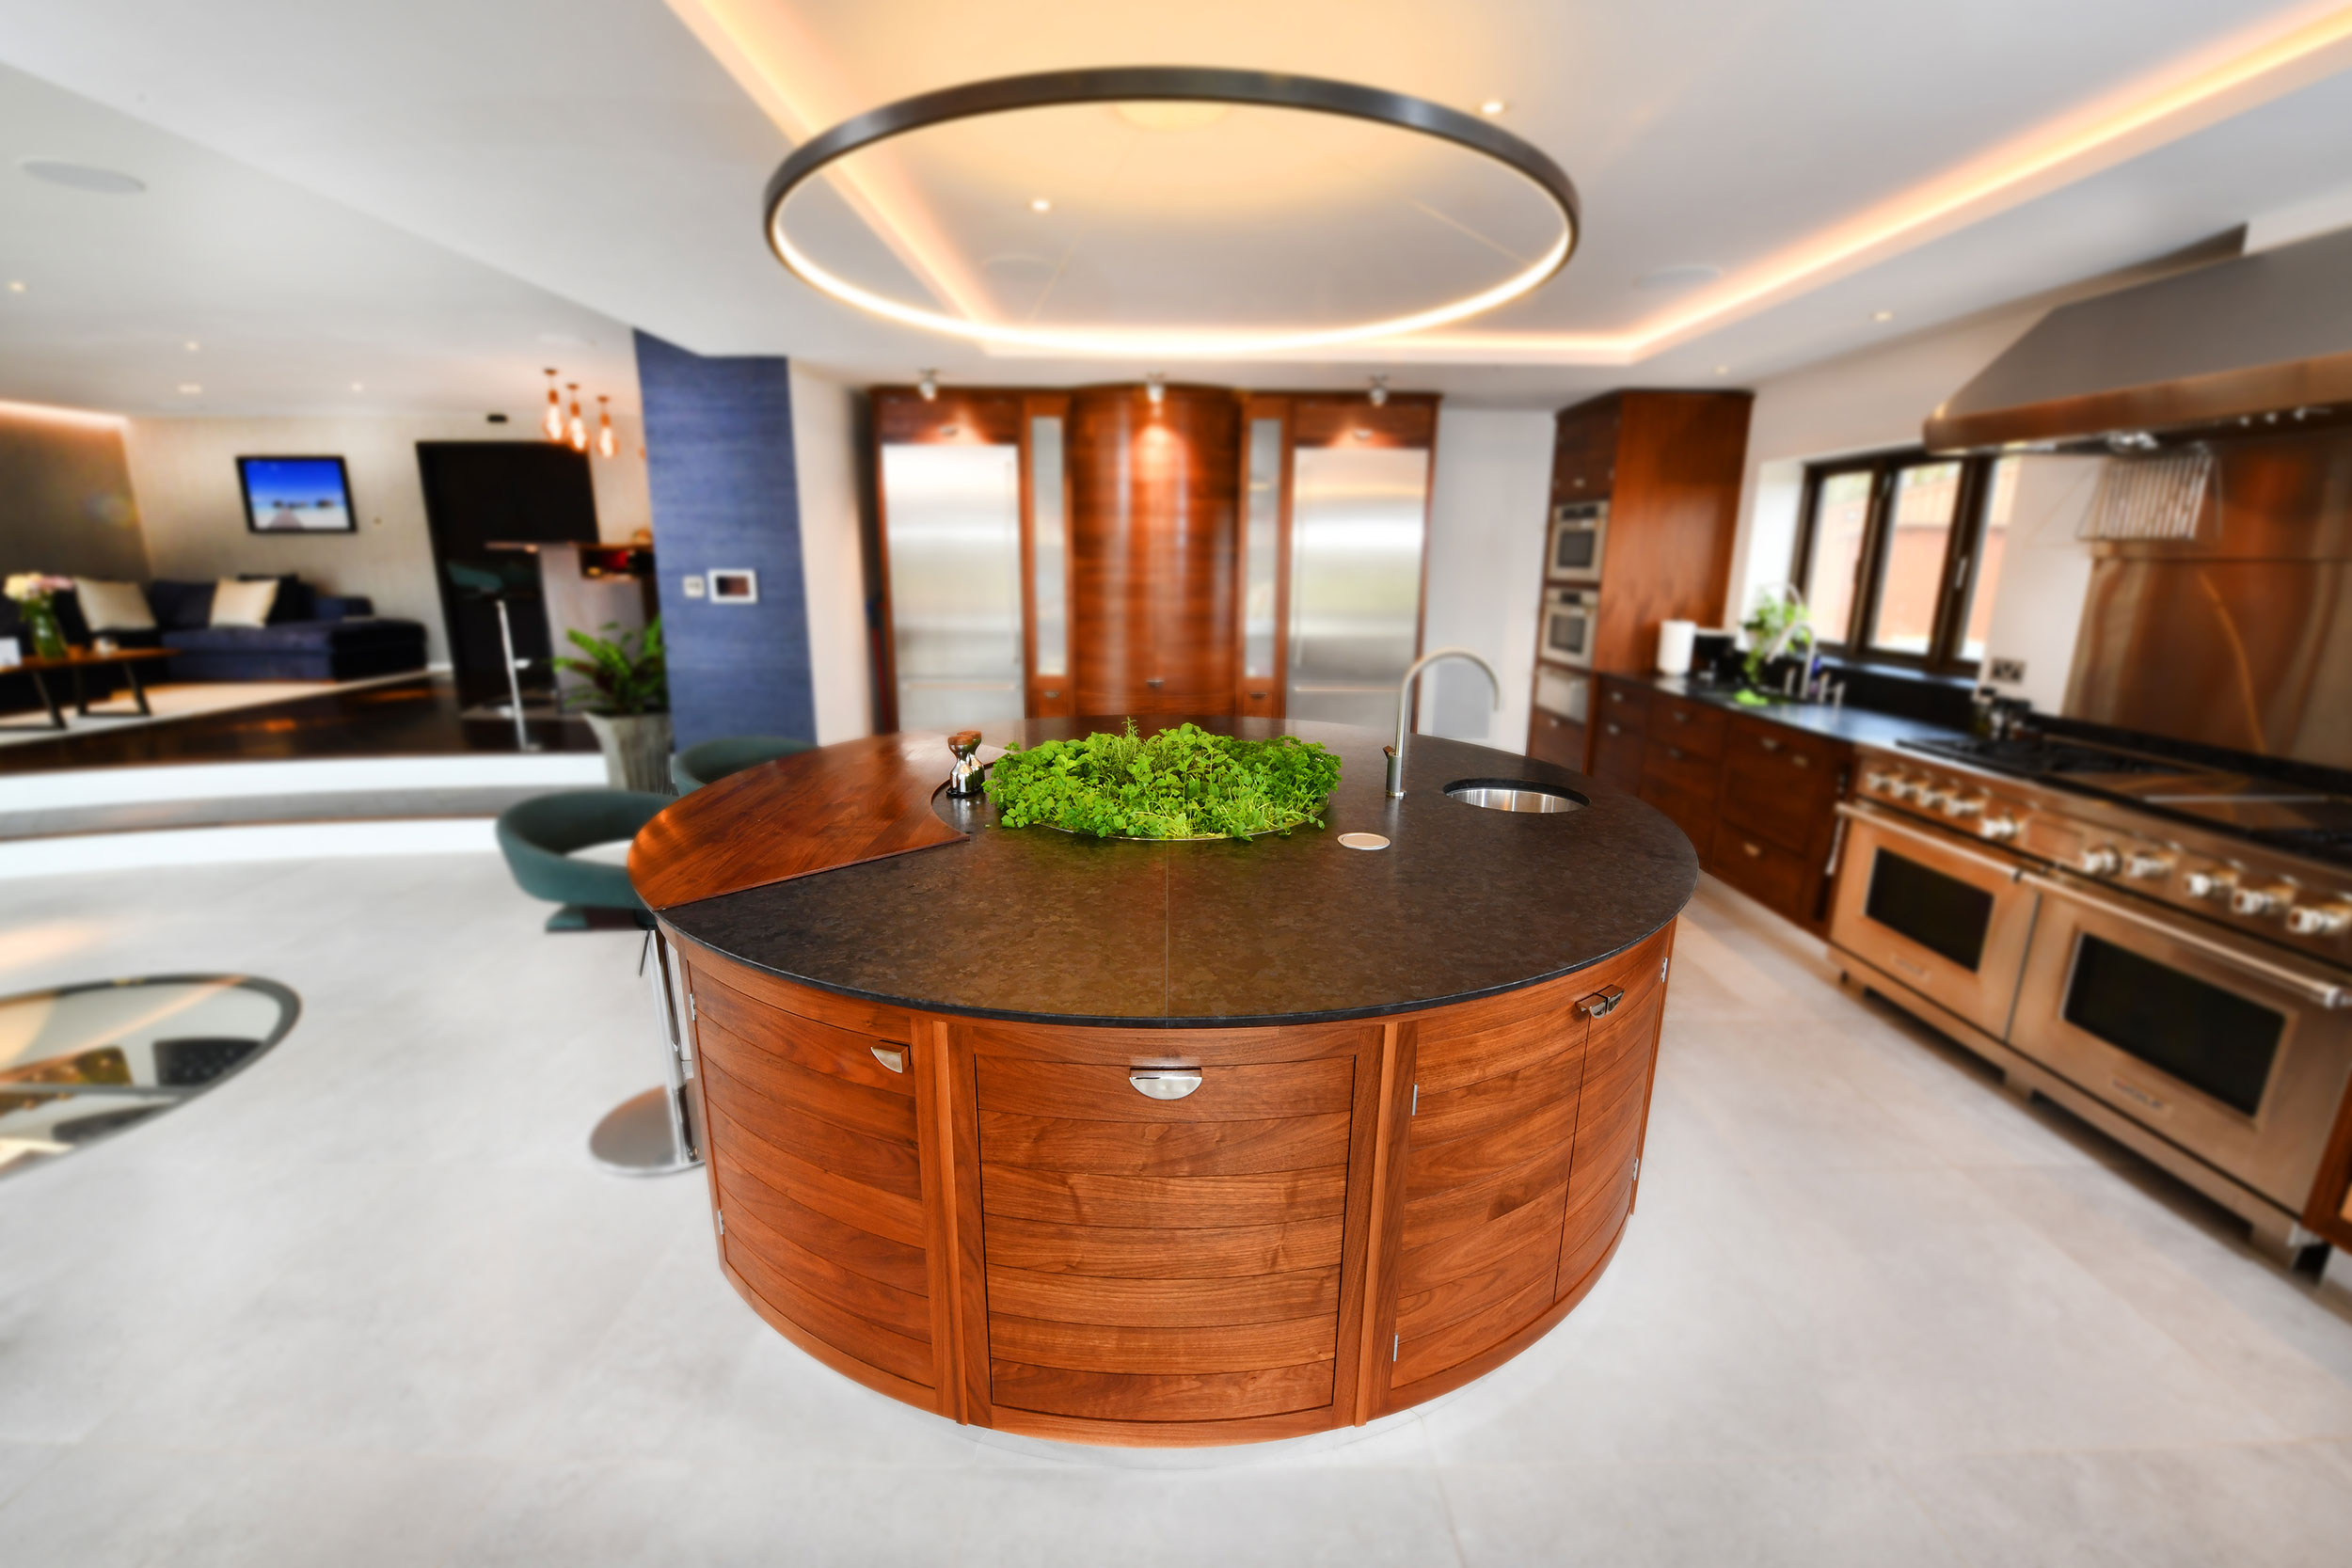  Hampshire Integrated Smart Home gallery image 3